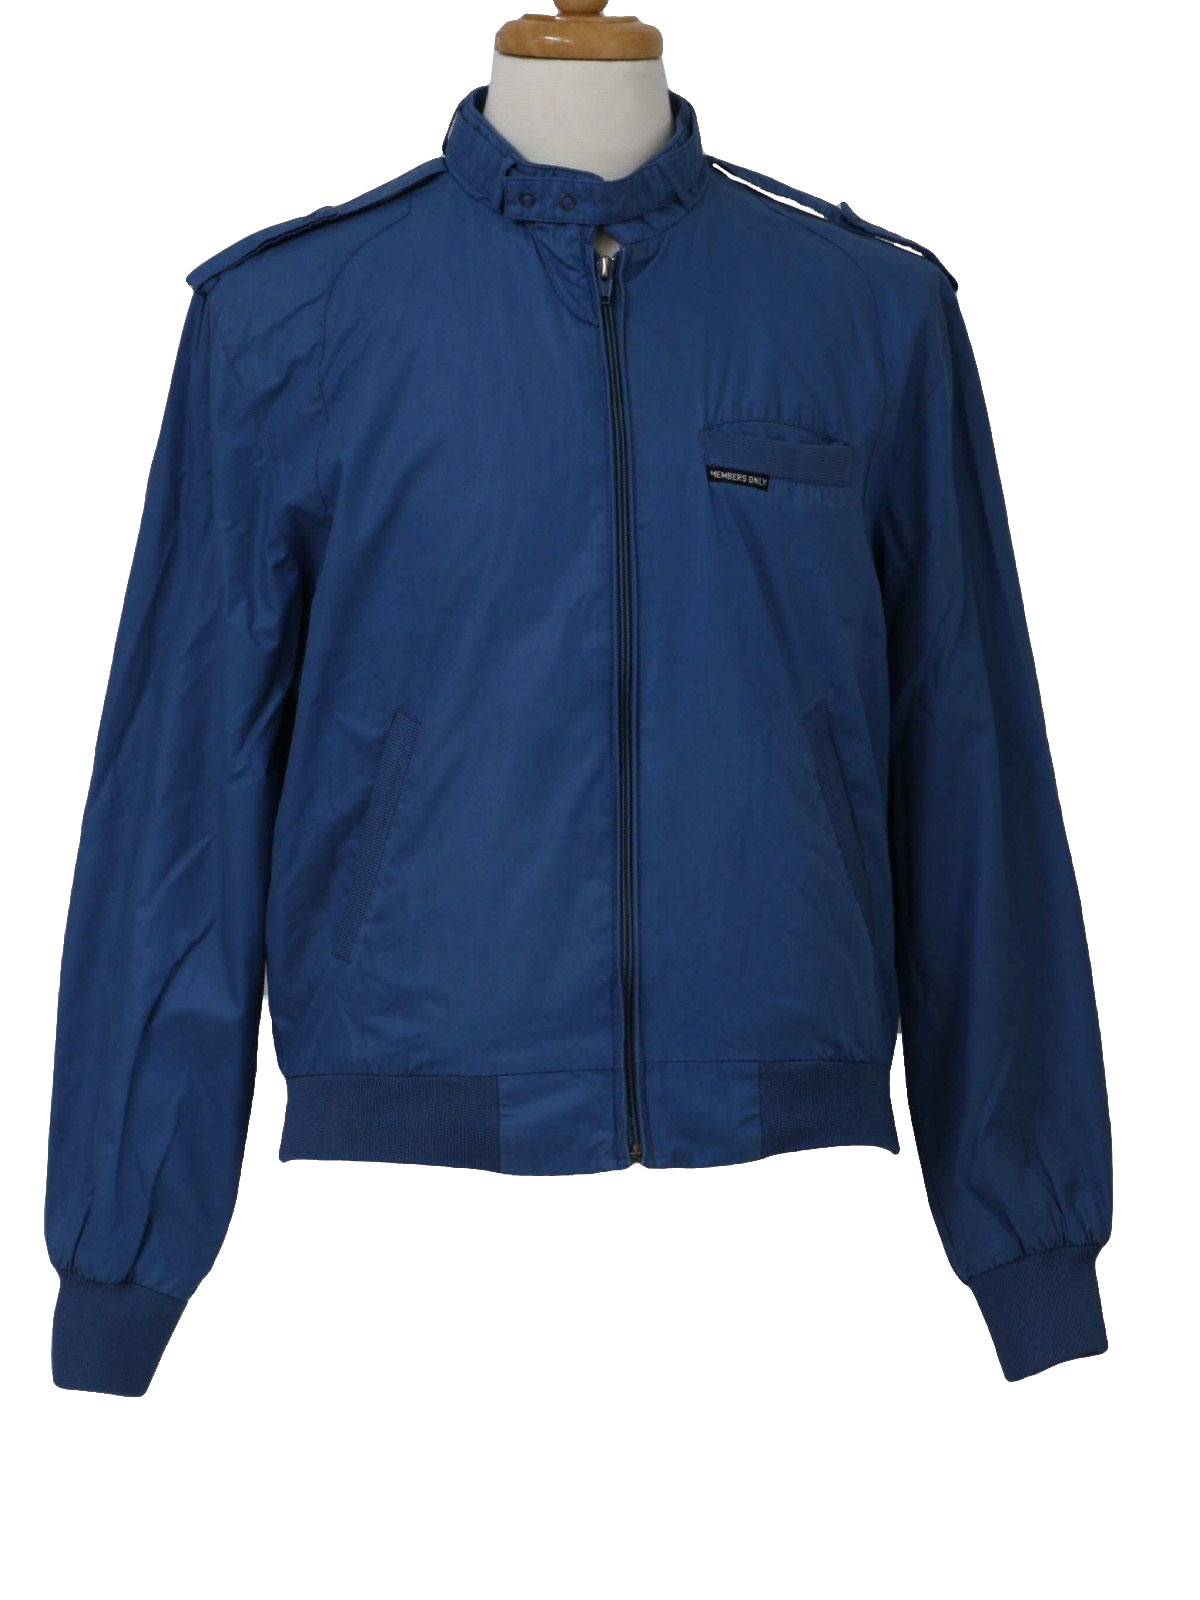 1980's Retro Jacket: 80s -Members Only- Mens marine blue cotton and ...